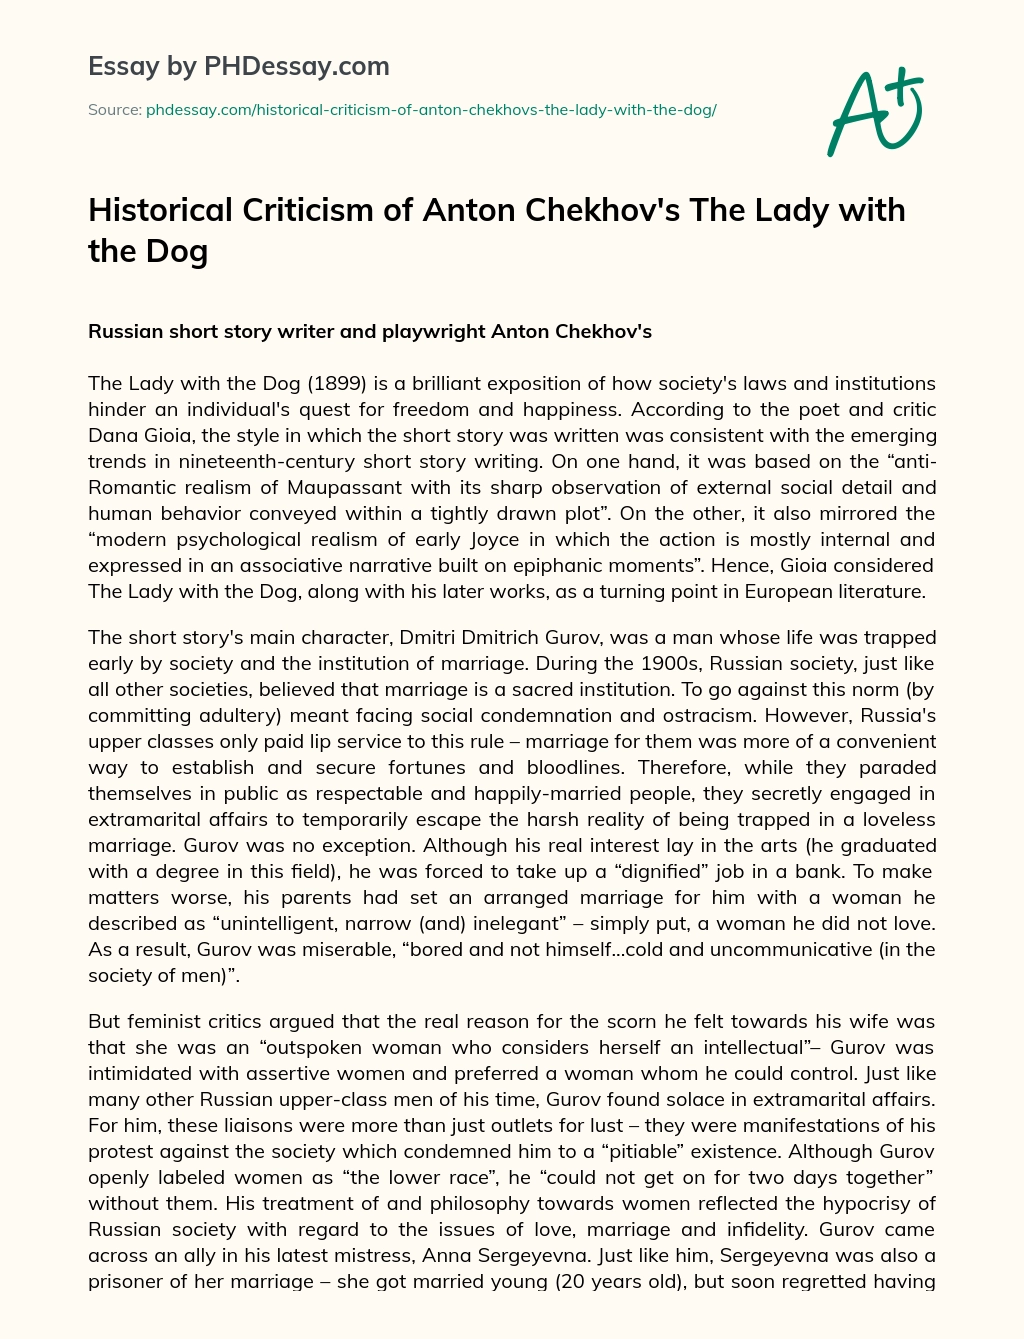 Historical Criticism of Anton Chekhov’s The Lady with the Dog essay